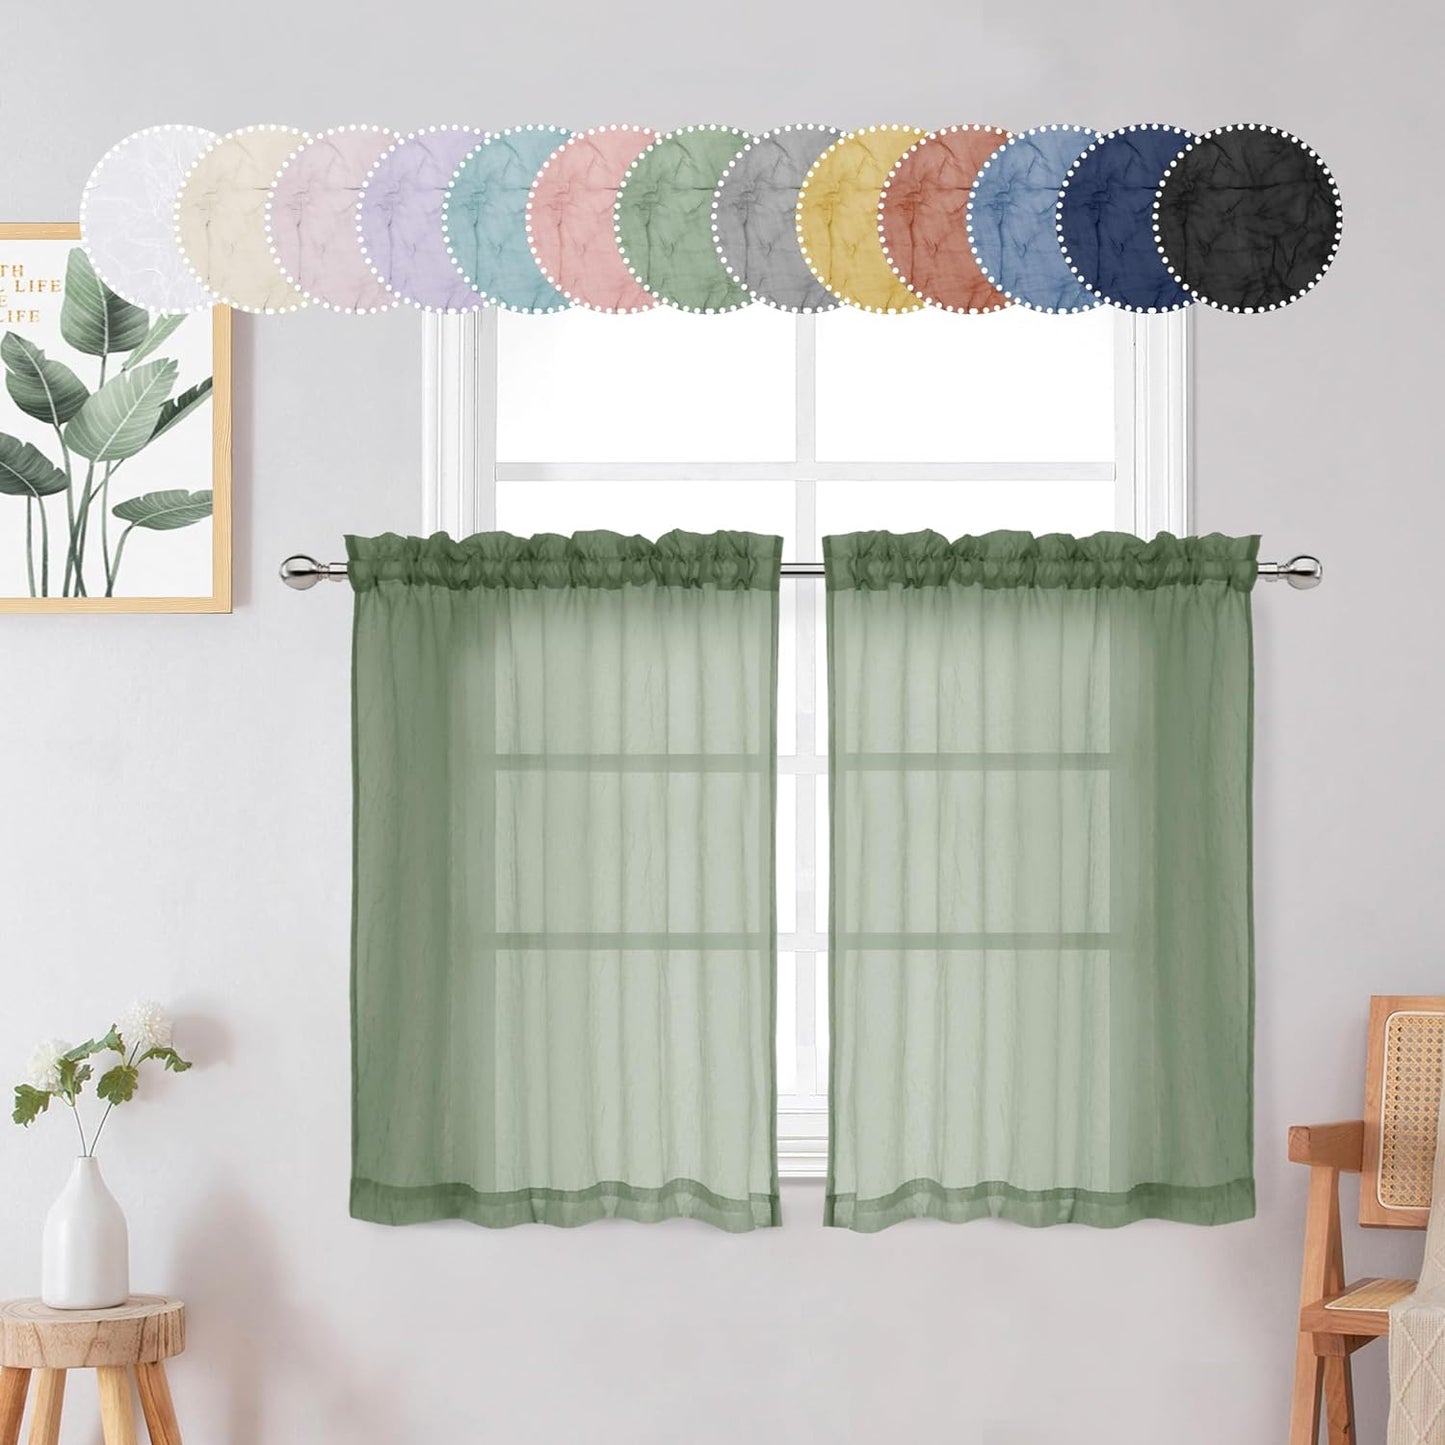 Chyhomenyc Crushed White Sheer Valances for Window 14 Inch Length 2 PCS, Crinkle Voile Short Kitchen Curtains with Dual Rod Pockets，Gauzy Bedroom Curtain Valance，Each 42Wx14L Inches  Chyhomenyc Sage Green 28 W X 24 L 